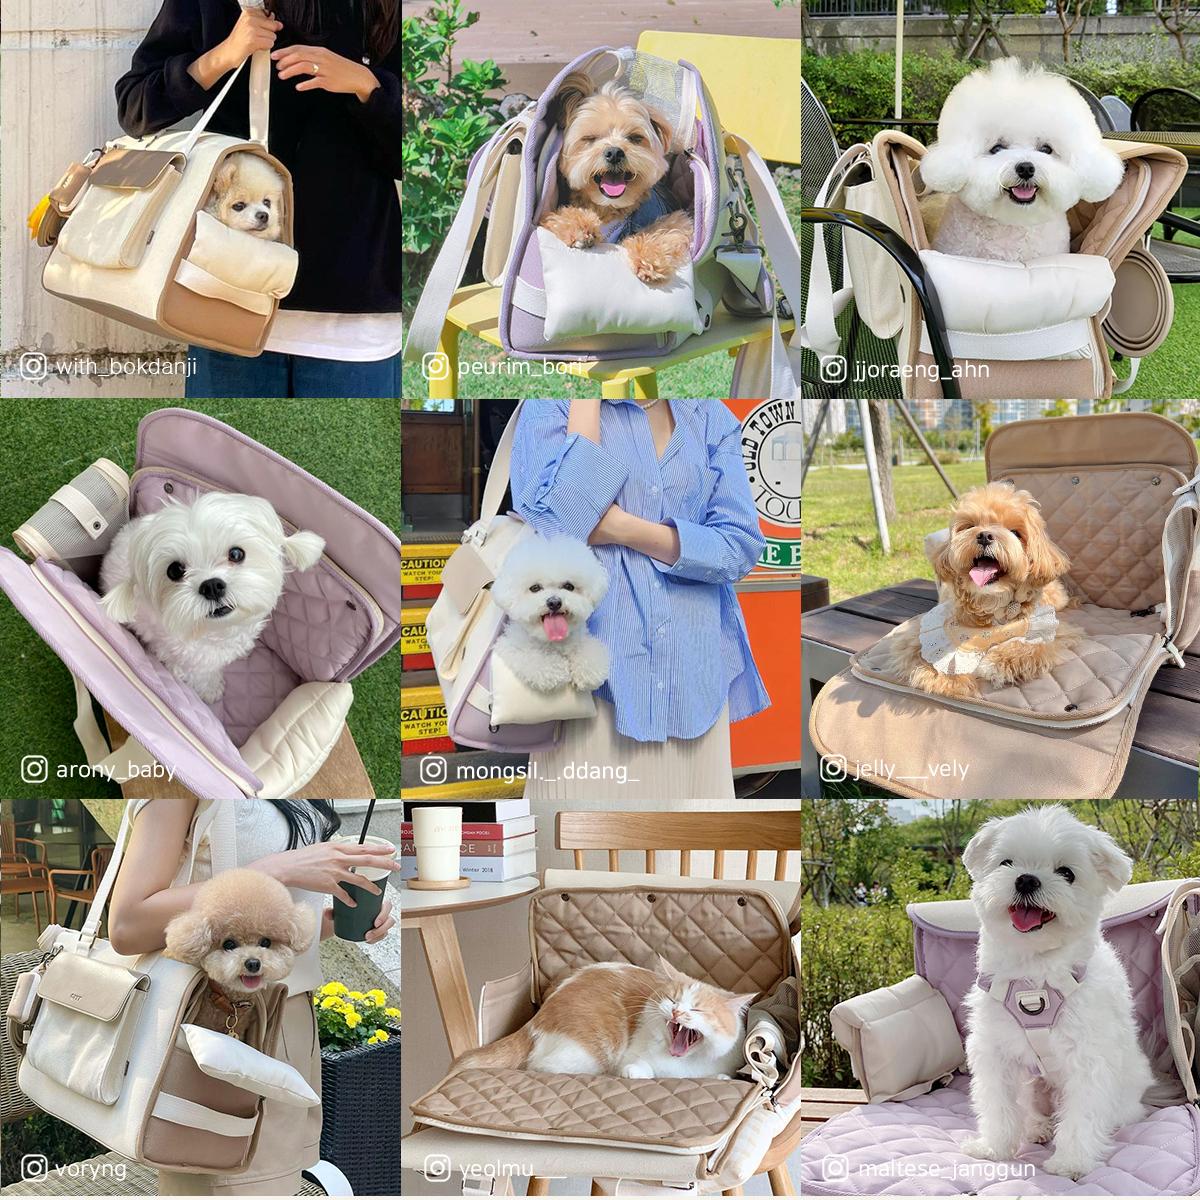 arrr Sunday Pet Bag (Pet Carrier) with dual use as an outgoing bag and portable cushion. Keep your pet safe and comfortable during outdoor activities. All in mesh design, several pockets, available to bring on public transportation. Peanut Beige / Lily Lavender / Pale Khaki color